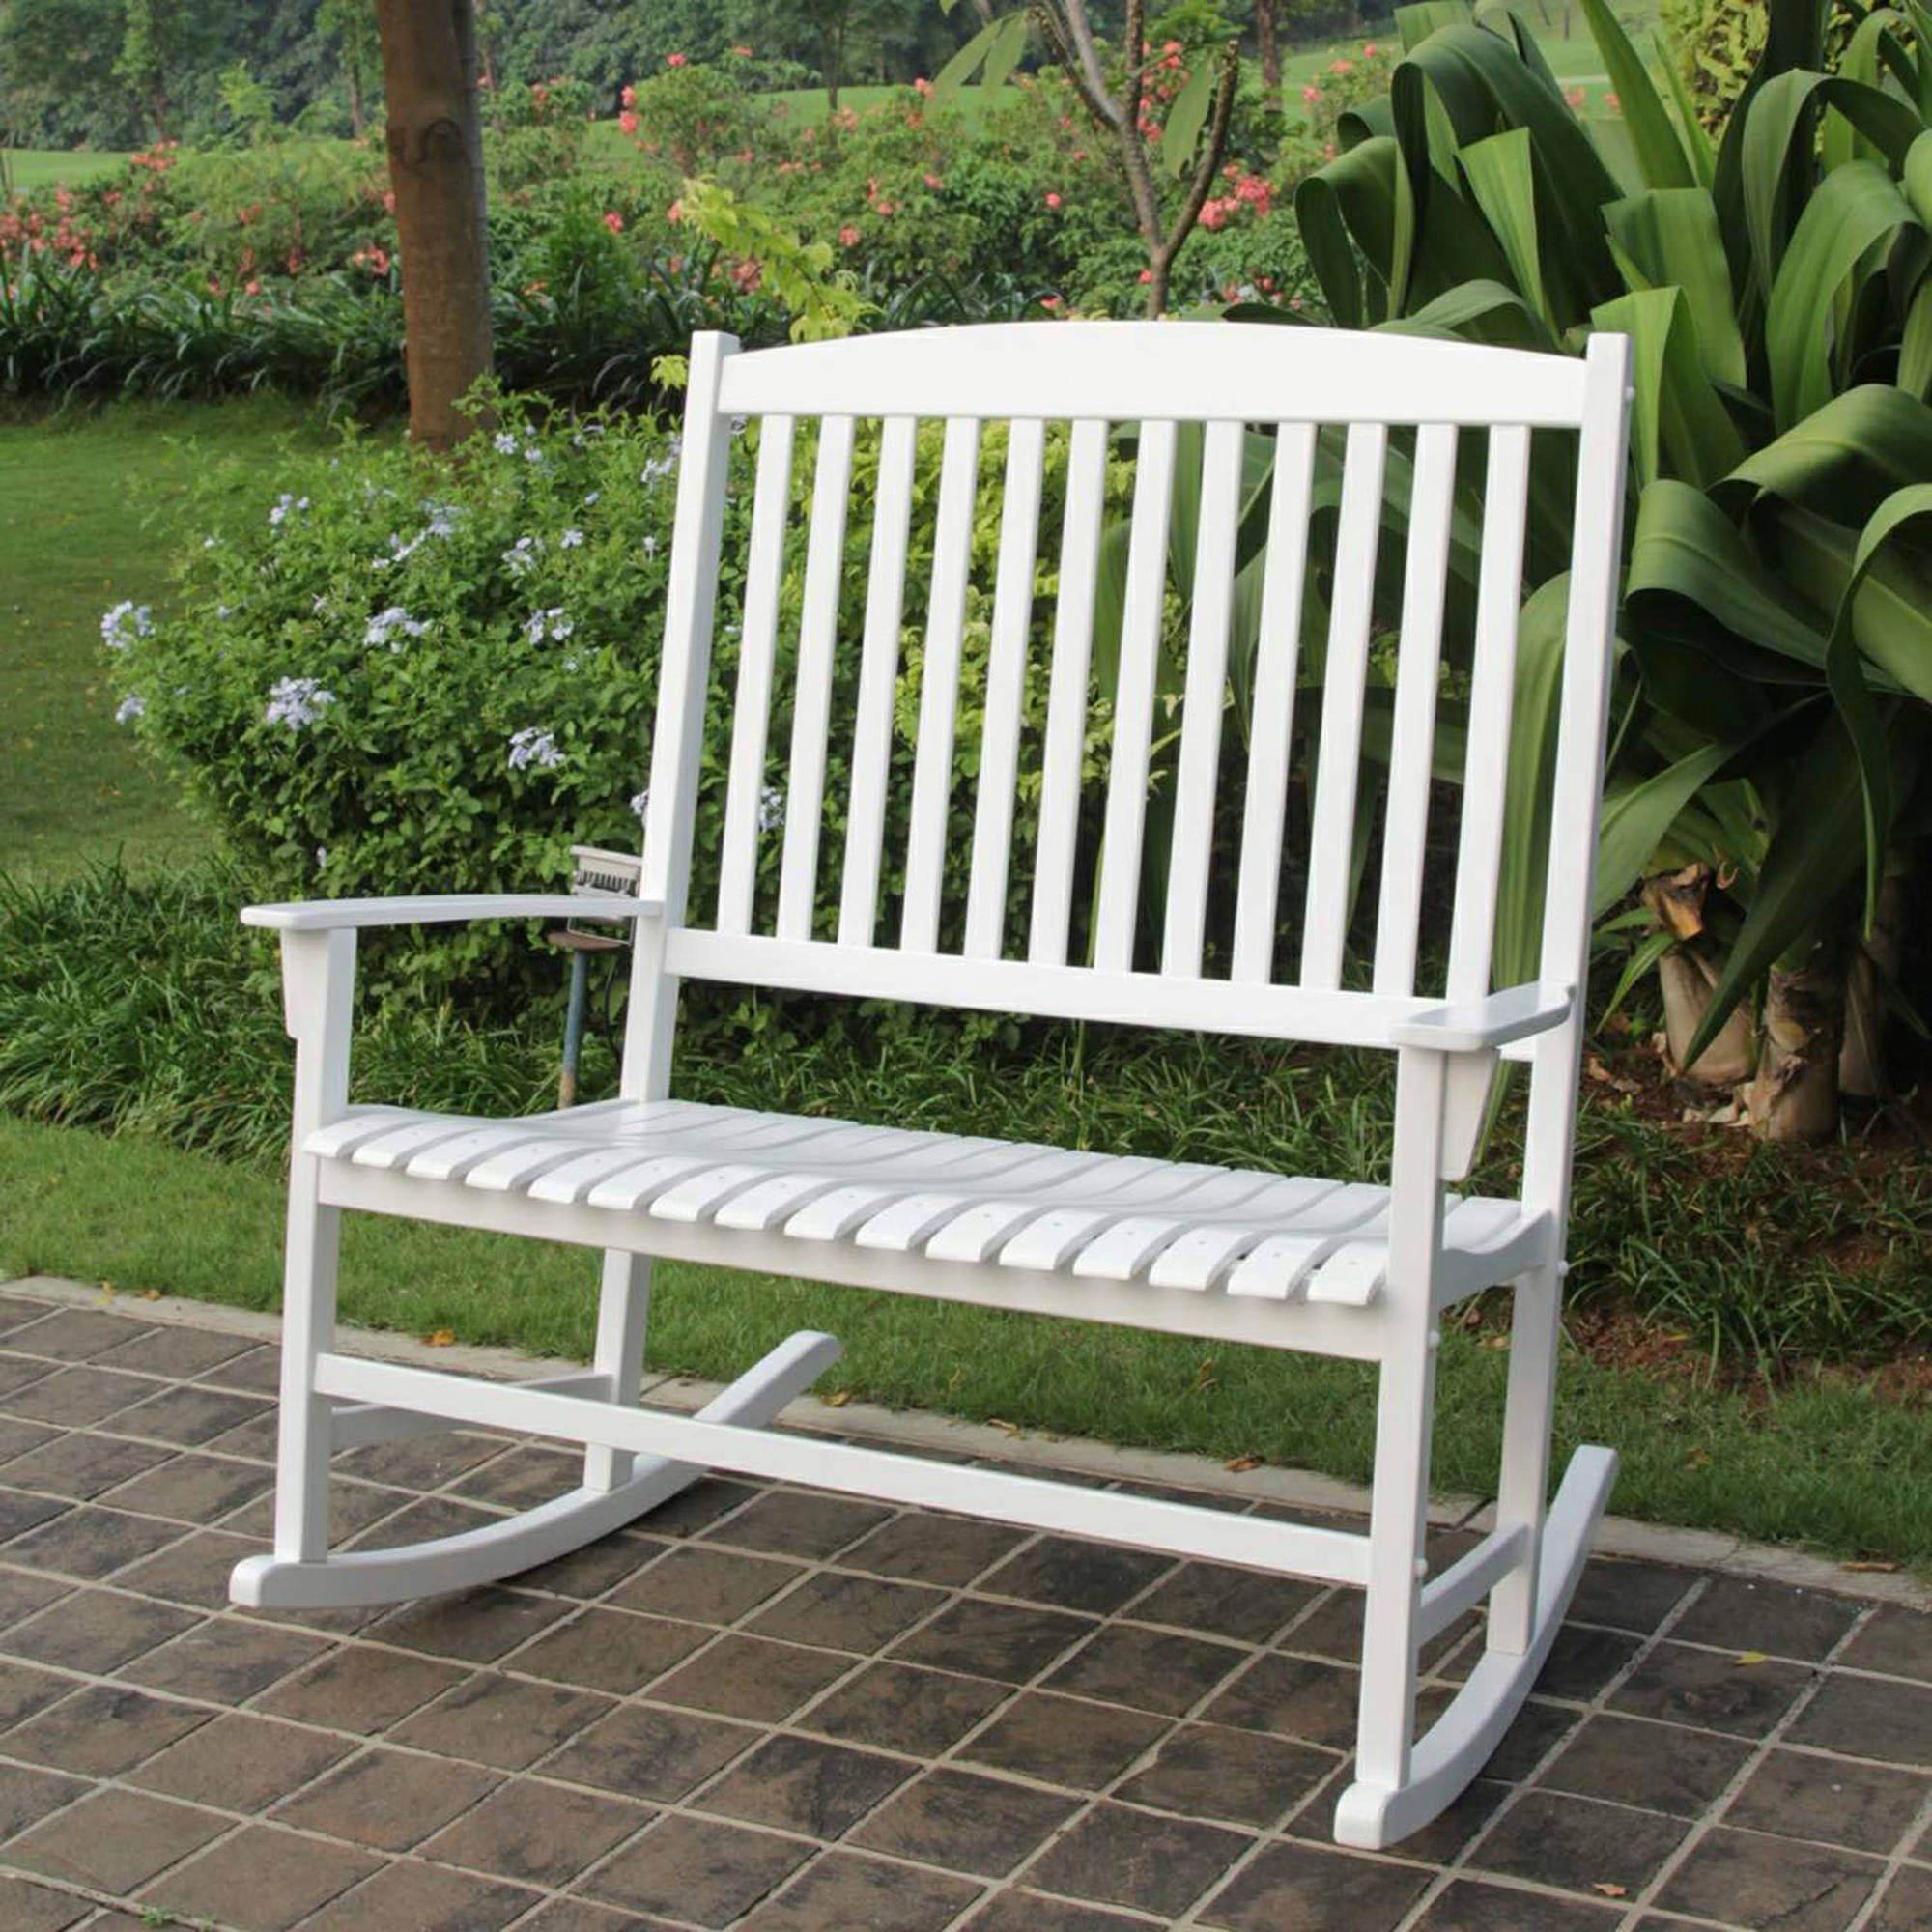 Mainstays Outdoor Double Rocking Chair White Solid Hardwood Wide Seat Intended For White Wood Soutdoor Seating Sets (View 2 of 15)